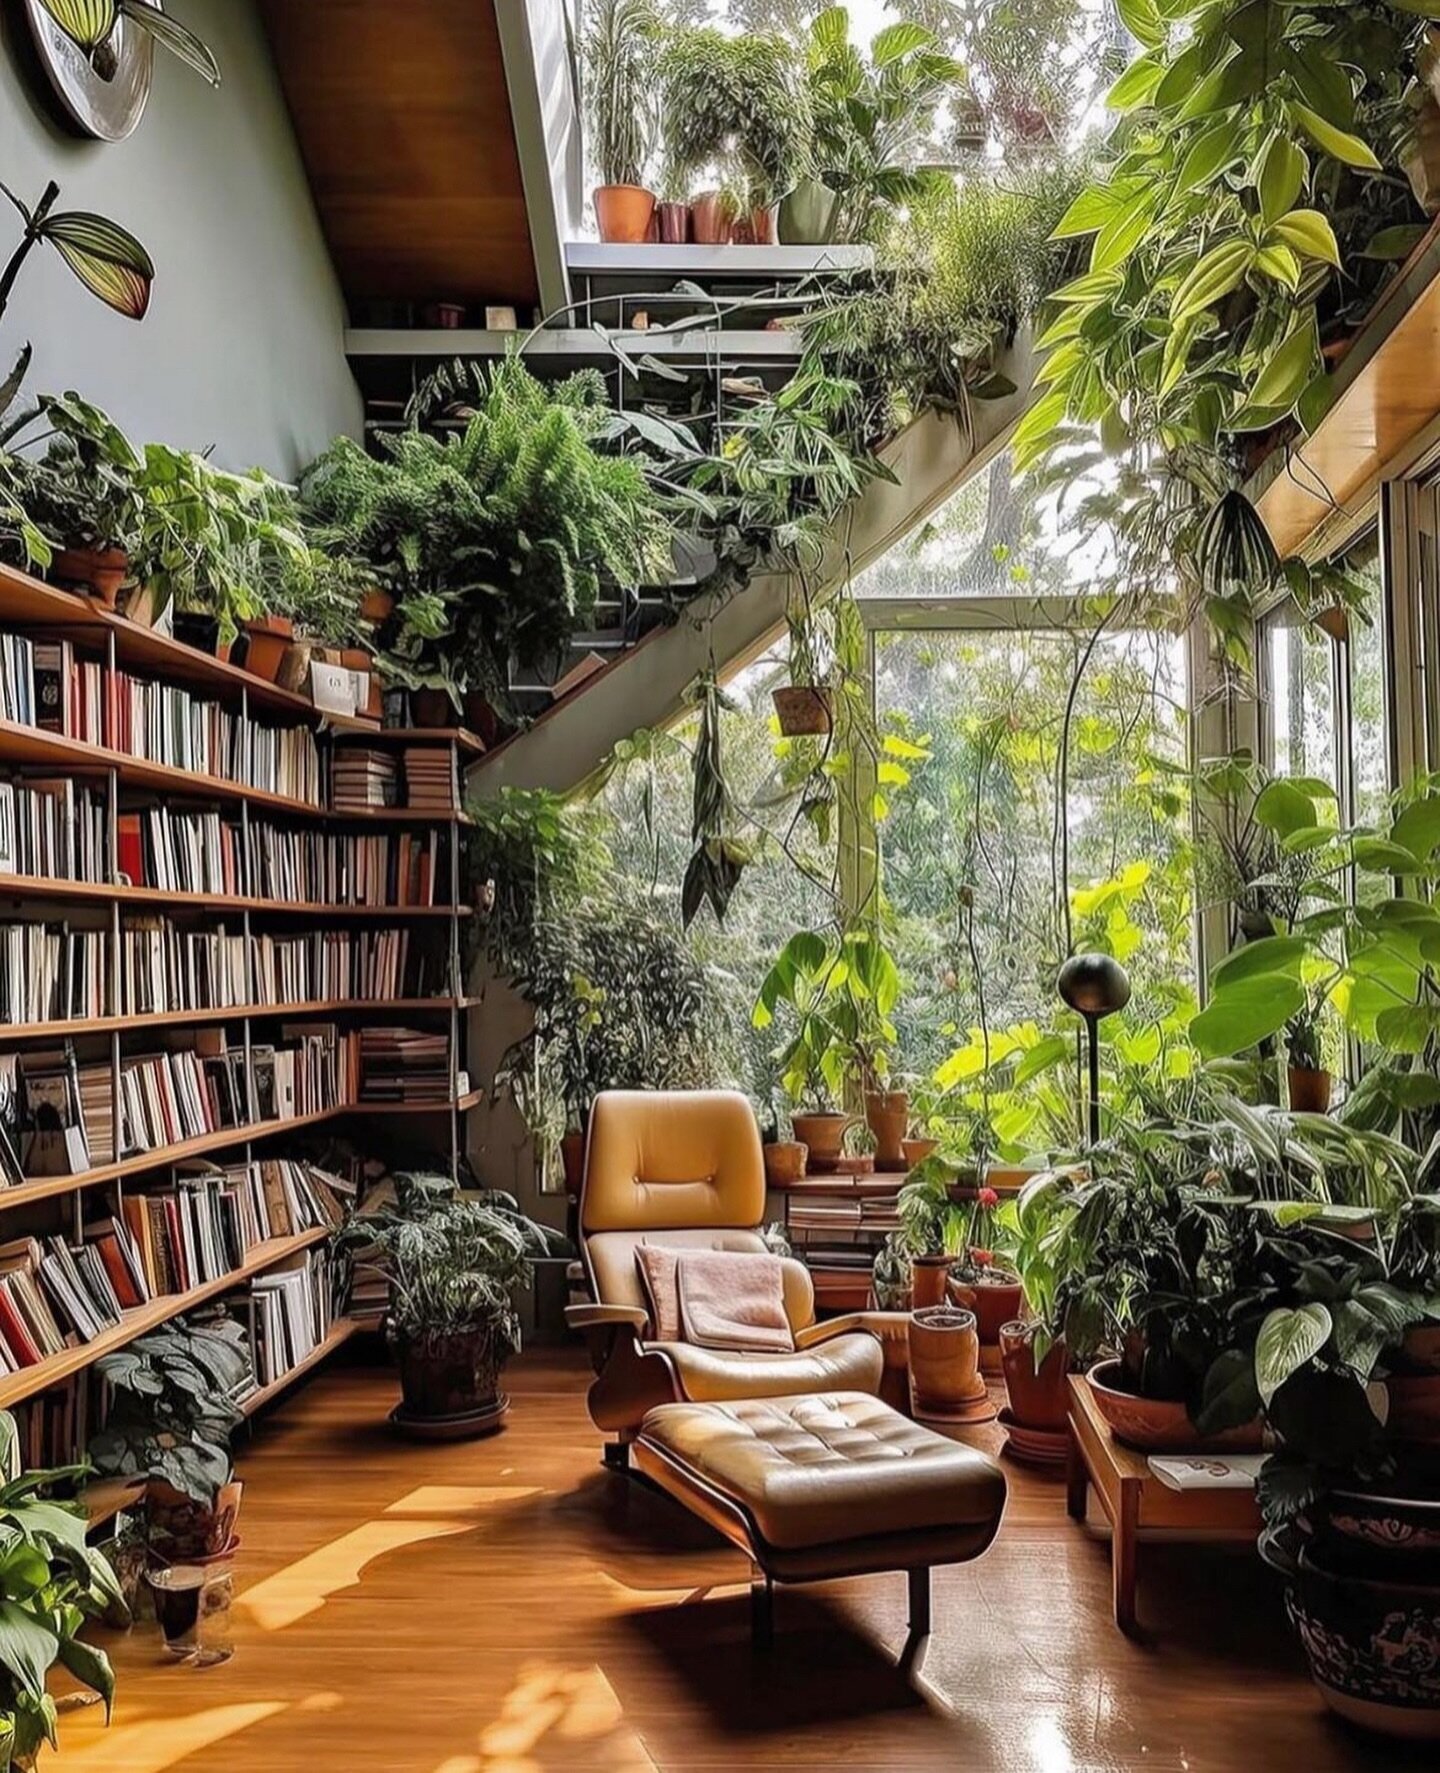 This is an important question.... Do you have enough plants? 
#repost @whereiwouldliketoread 

#read #design #nature #plants #Eames #library #interiordesign #eameschair